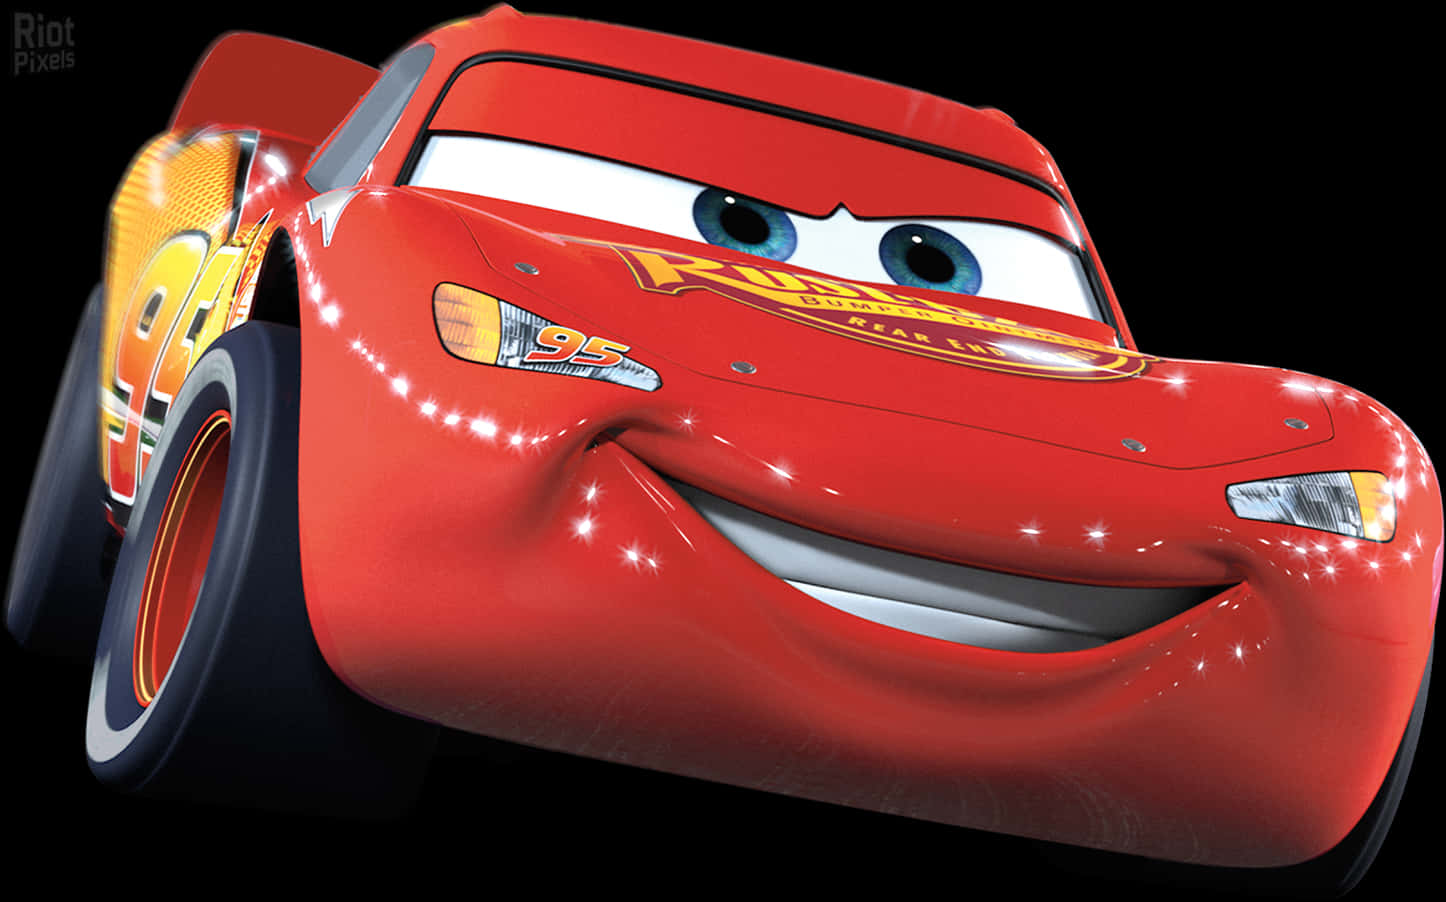 A Red Cartoon Car With A Smiling Face